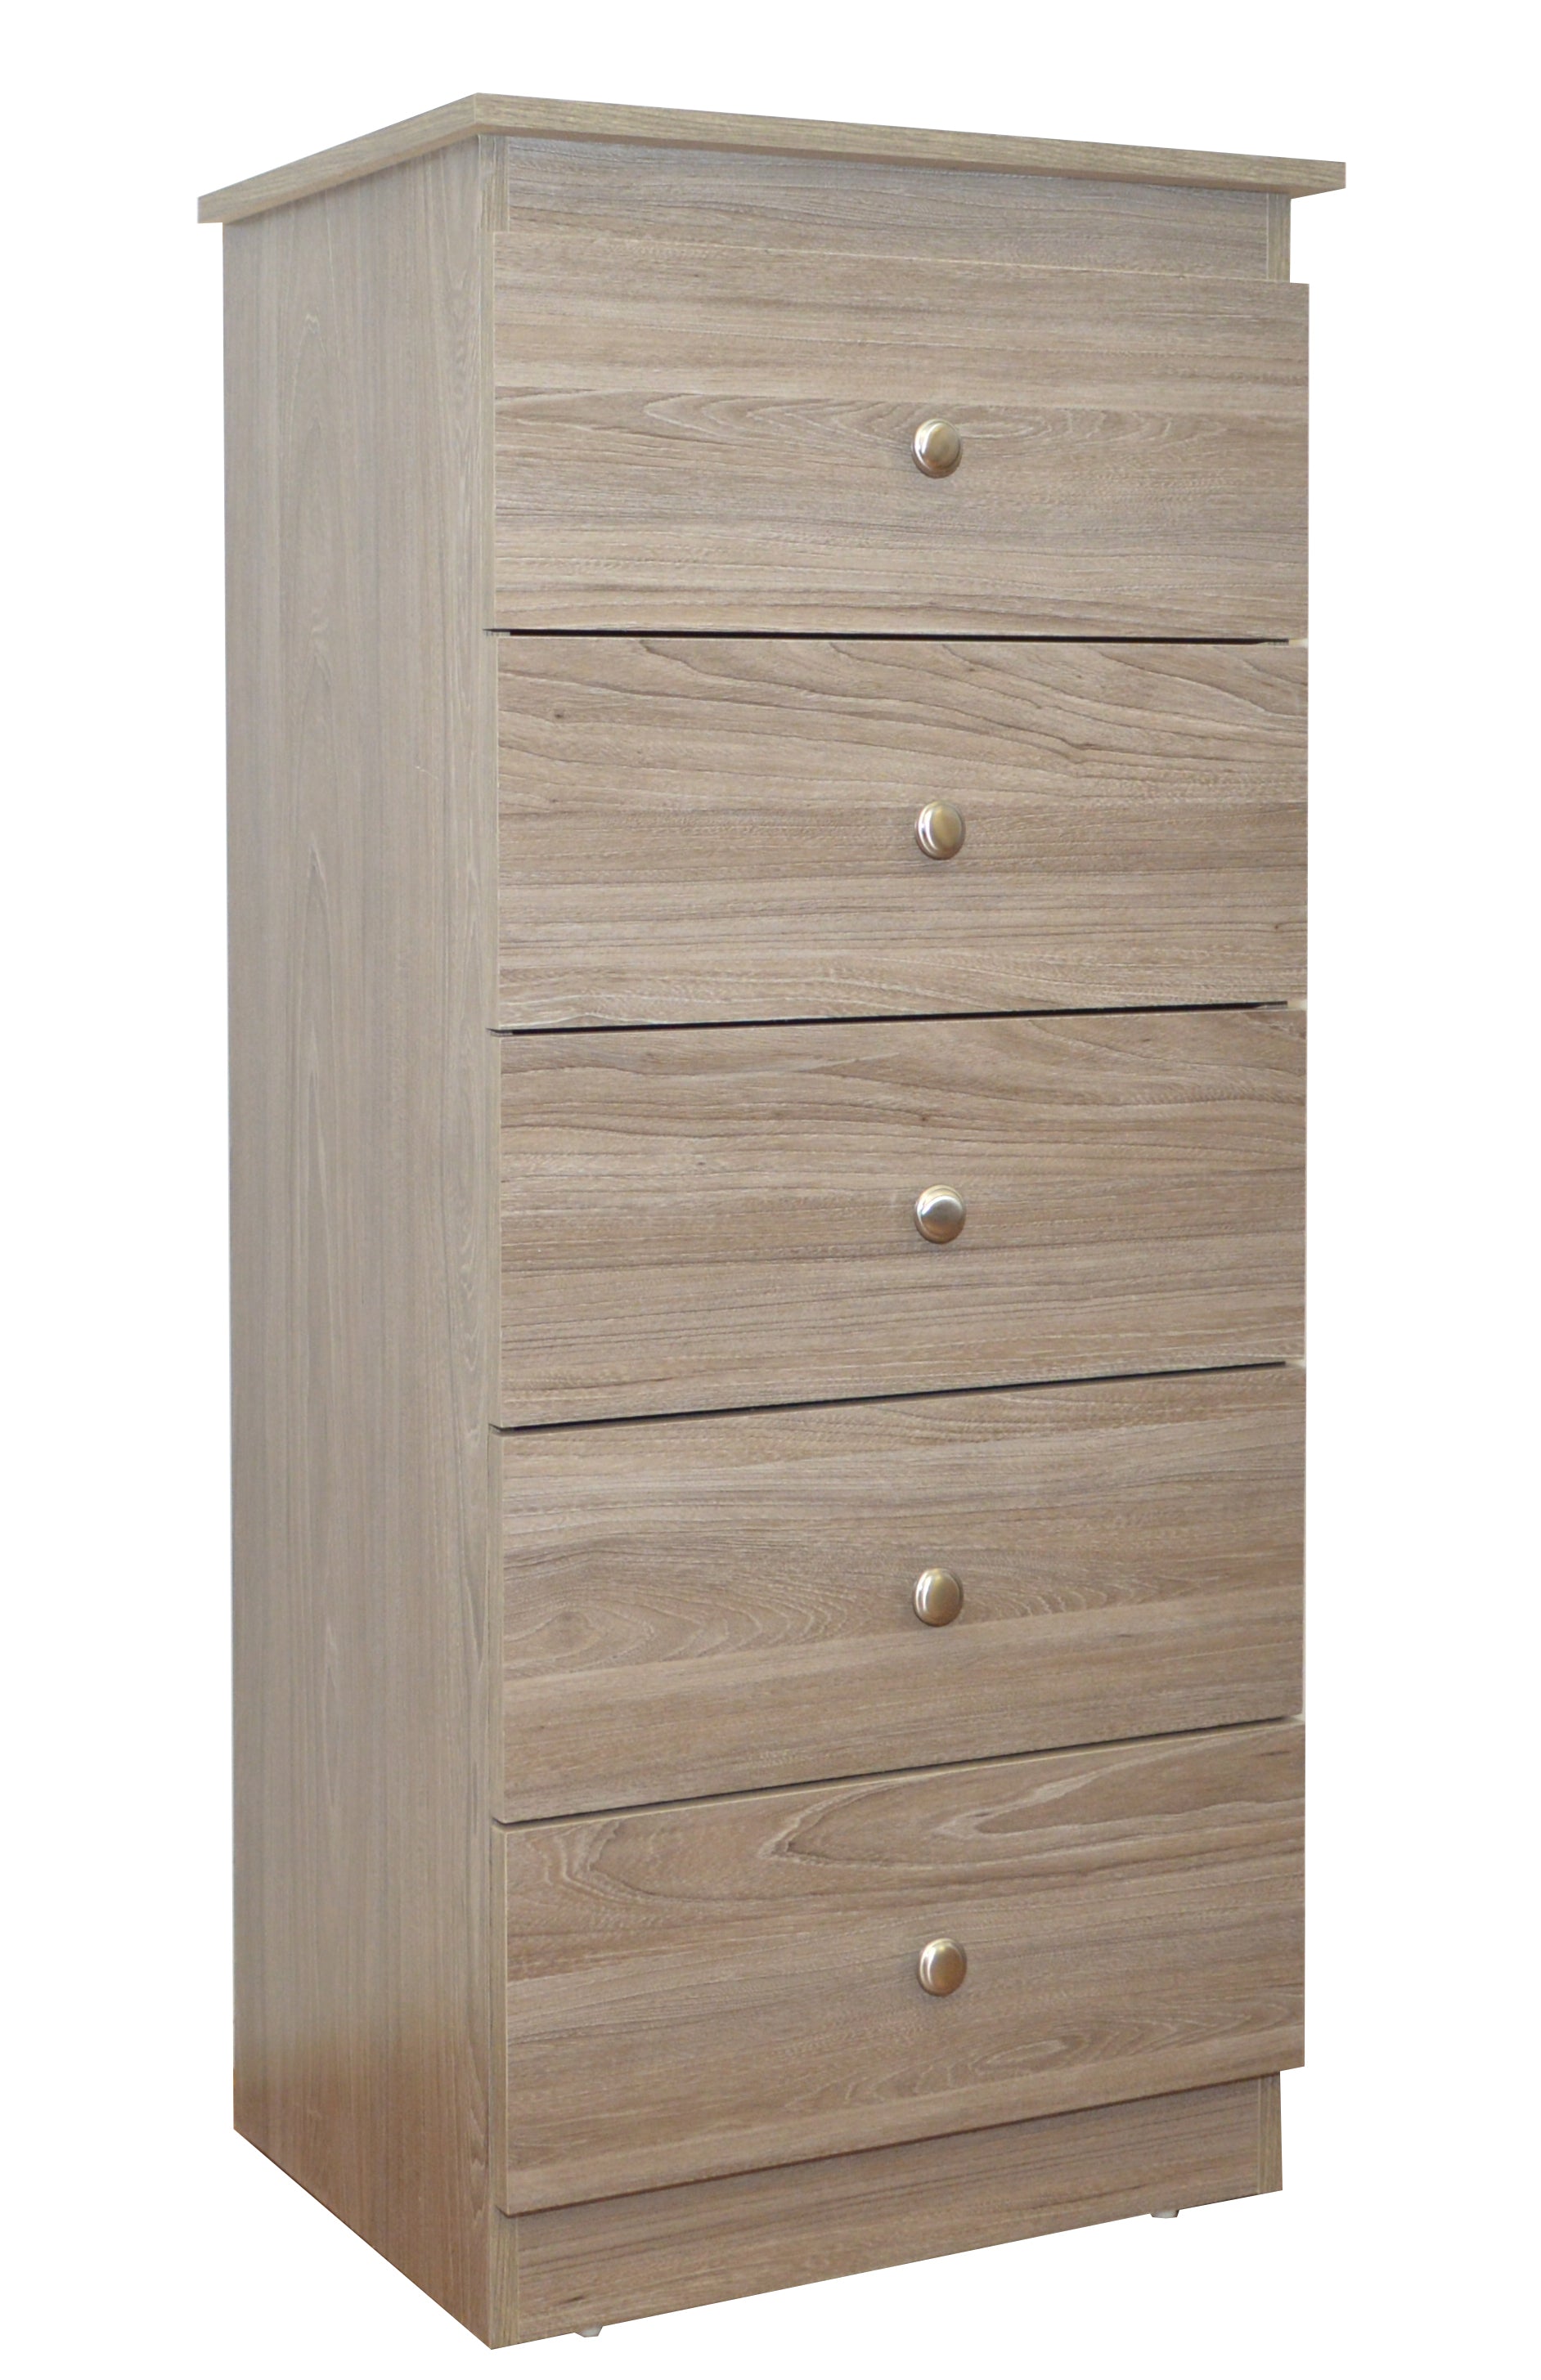 NT5 Drawer Tall Narrow Chest